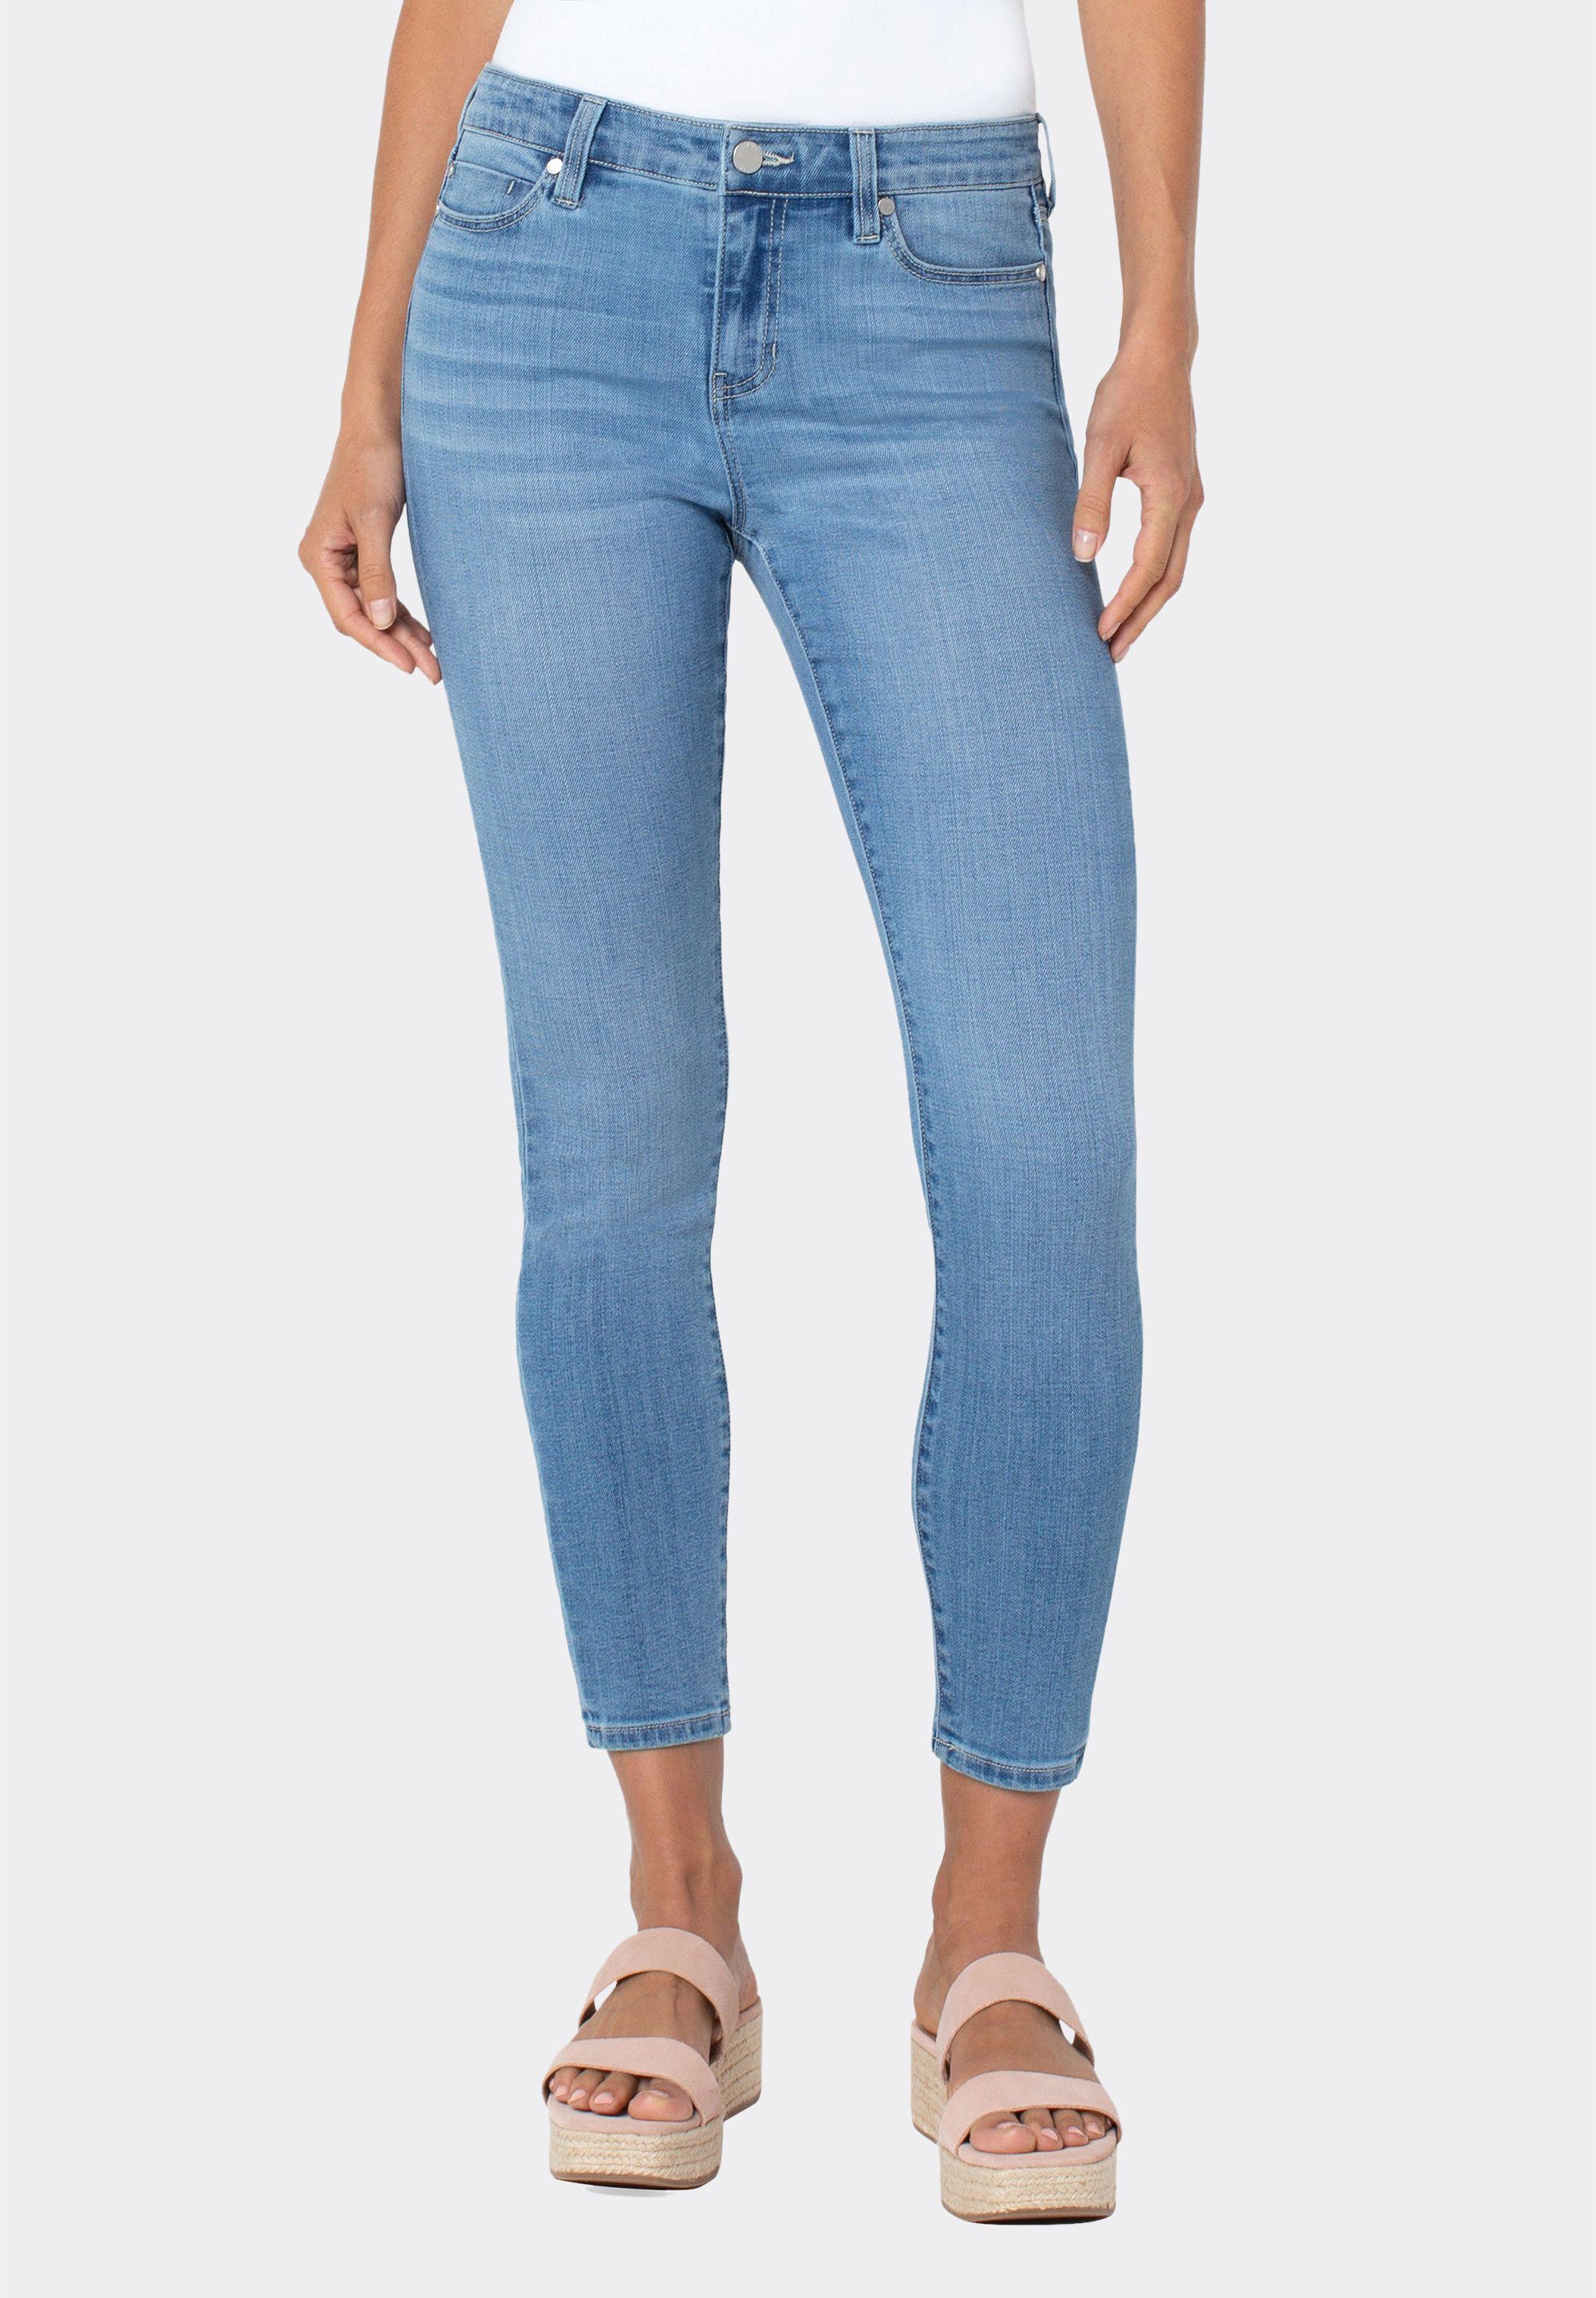 Ankle-Jeans komfortabel Liverpool Ankle und Stretchy Abby Skinny